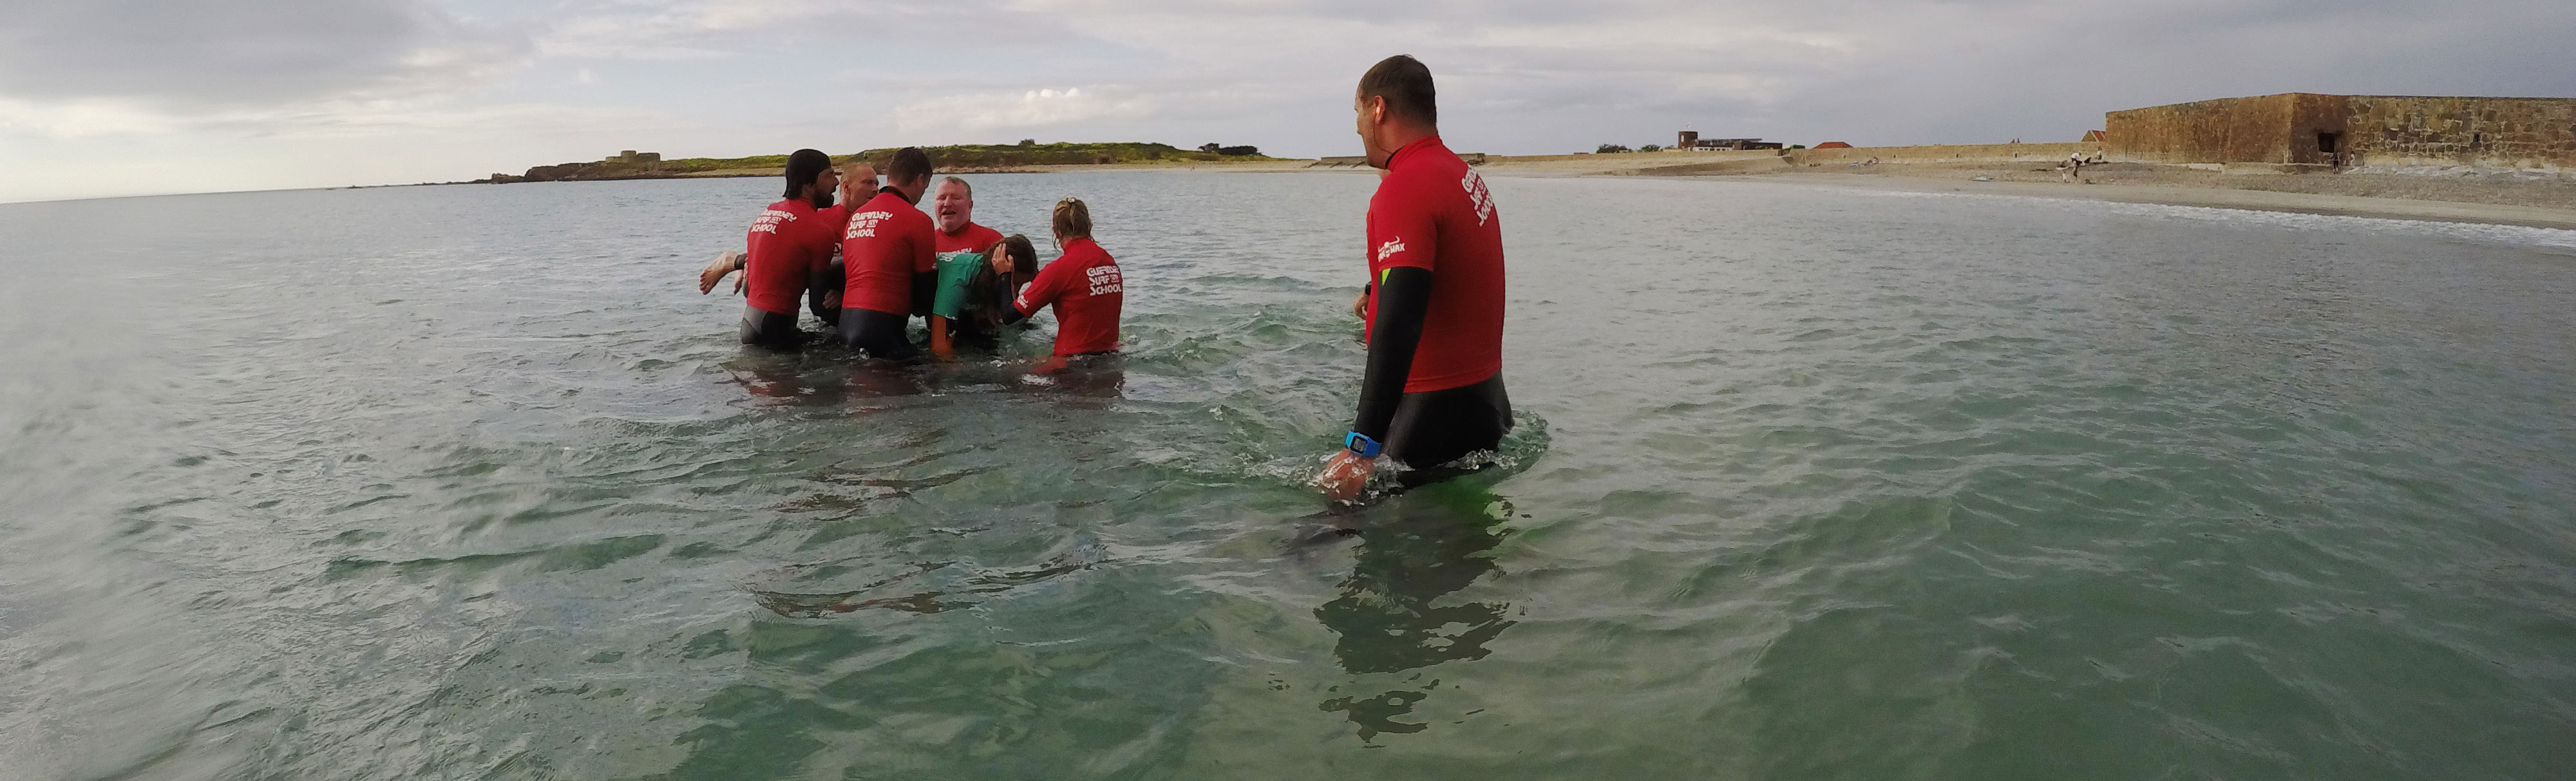 Life Saving Training Course with the Guernsey Surf School